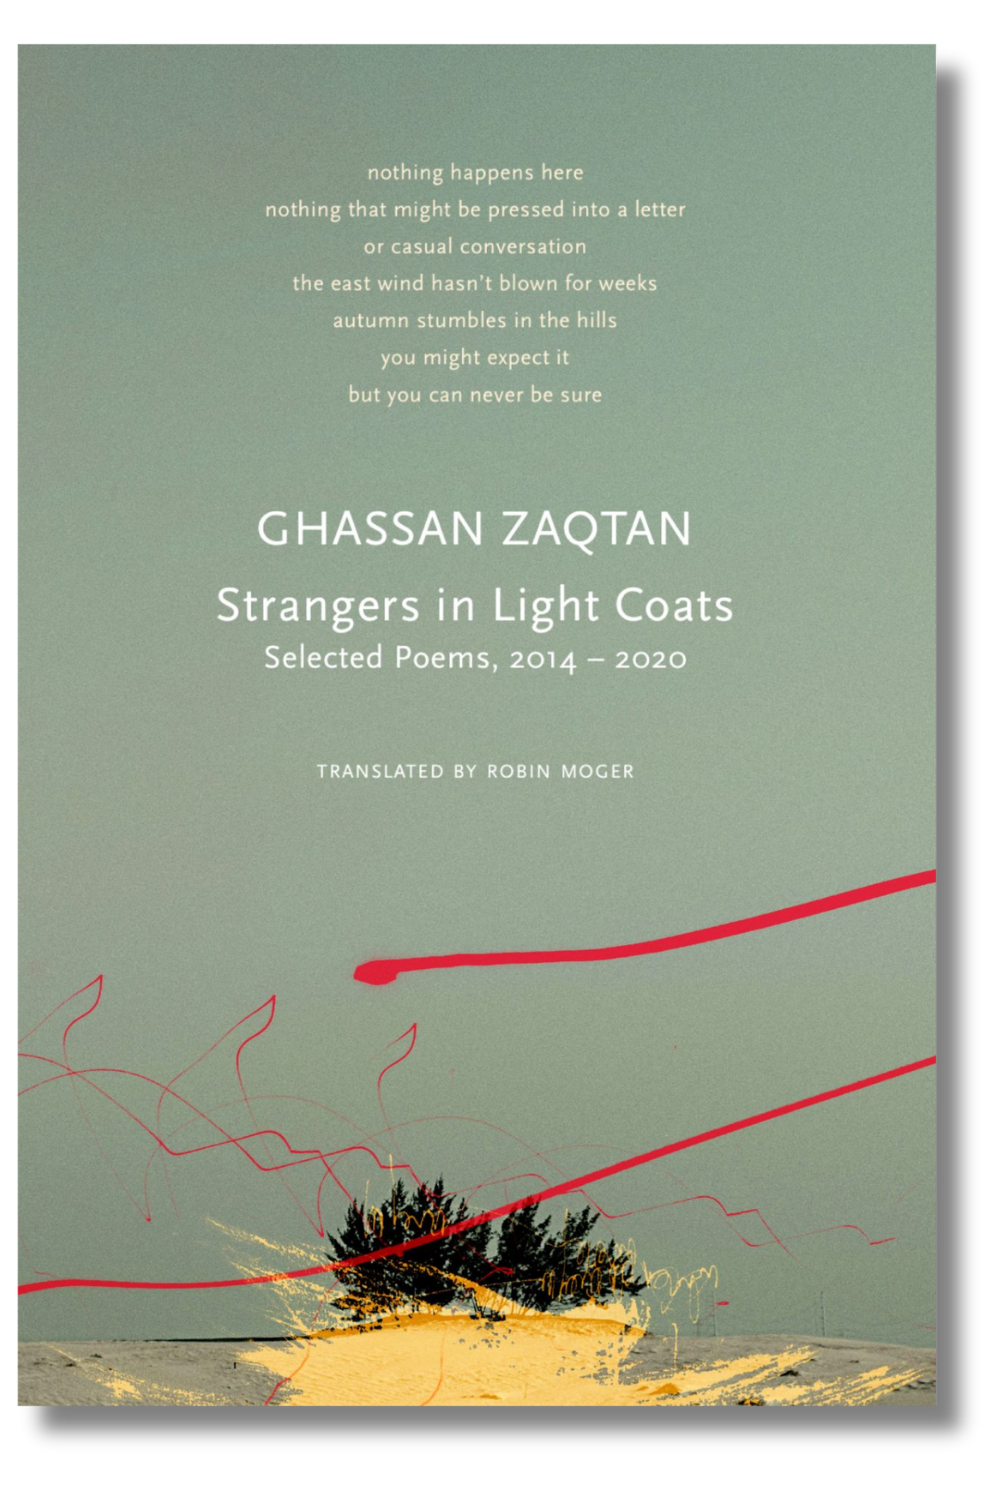 The cover of "Strangers in Light Coats" by Ghassan Zaqtan, tr. by Robin Moger